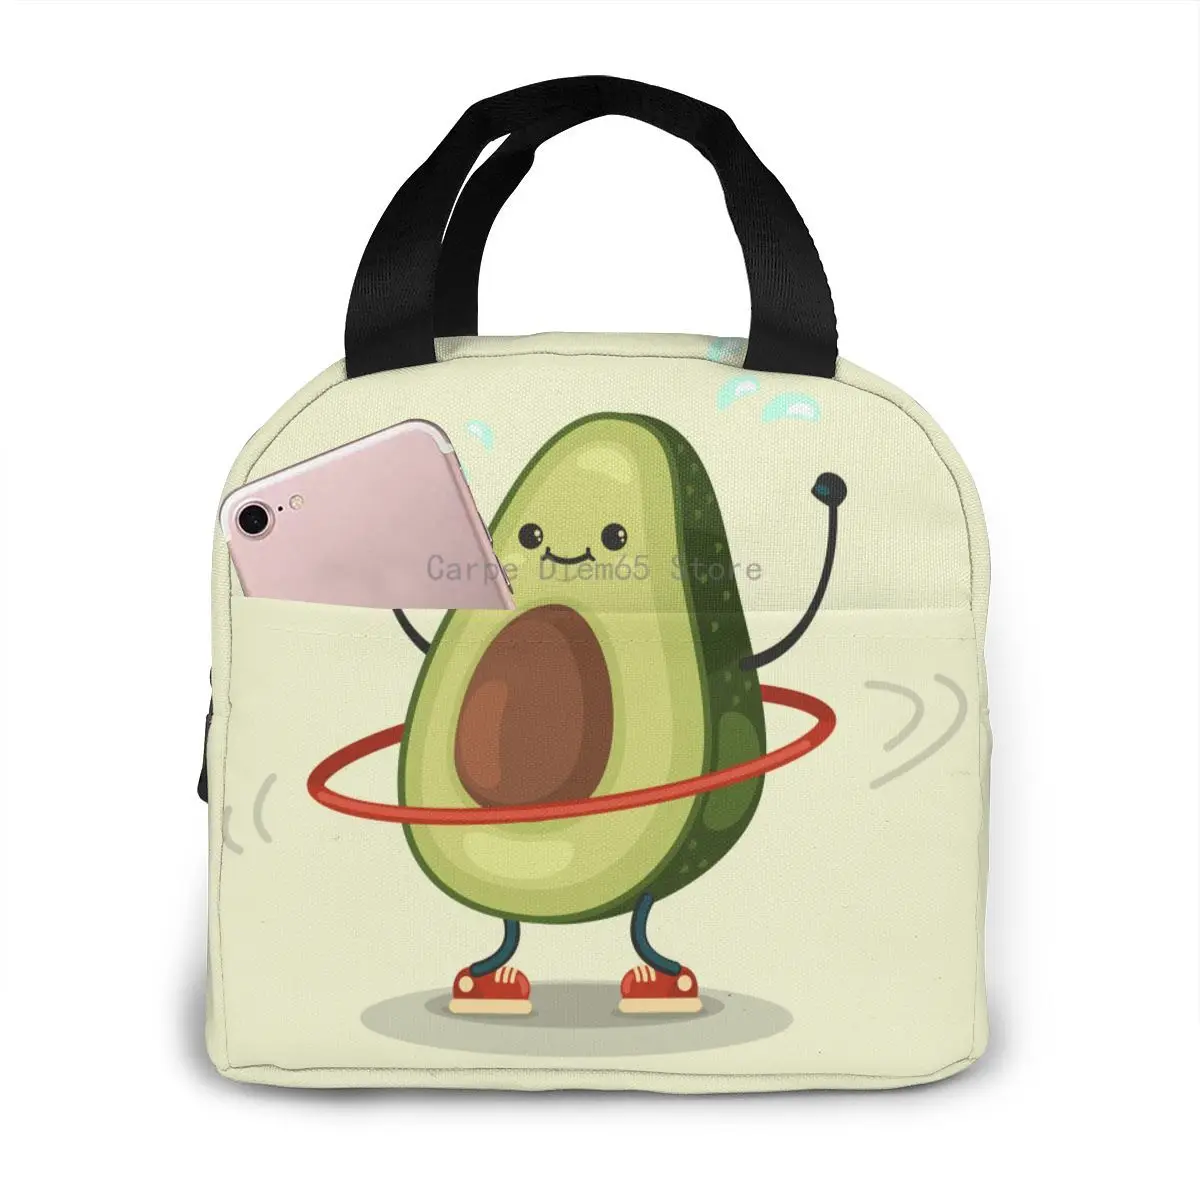 

Lunch Bag Cute Avocado Doing Exercises Thermal Insulated Lunch Box Tote Cooler Bag Bento Pouch Lunch Container Food Storage Bag